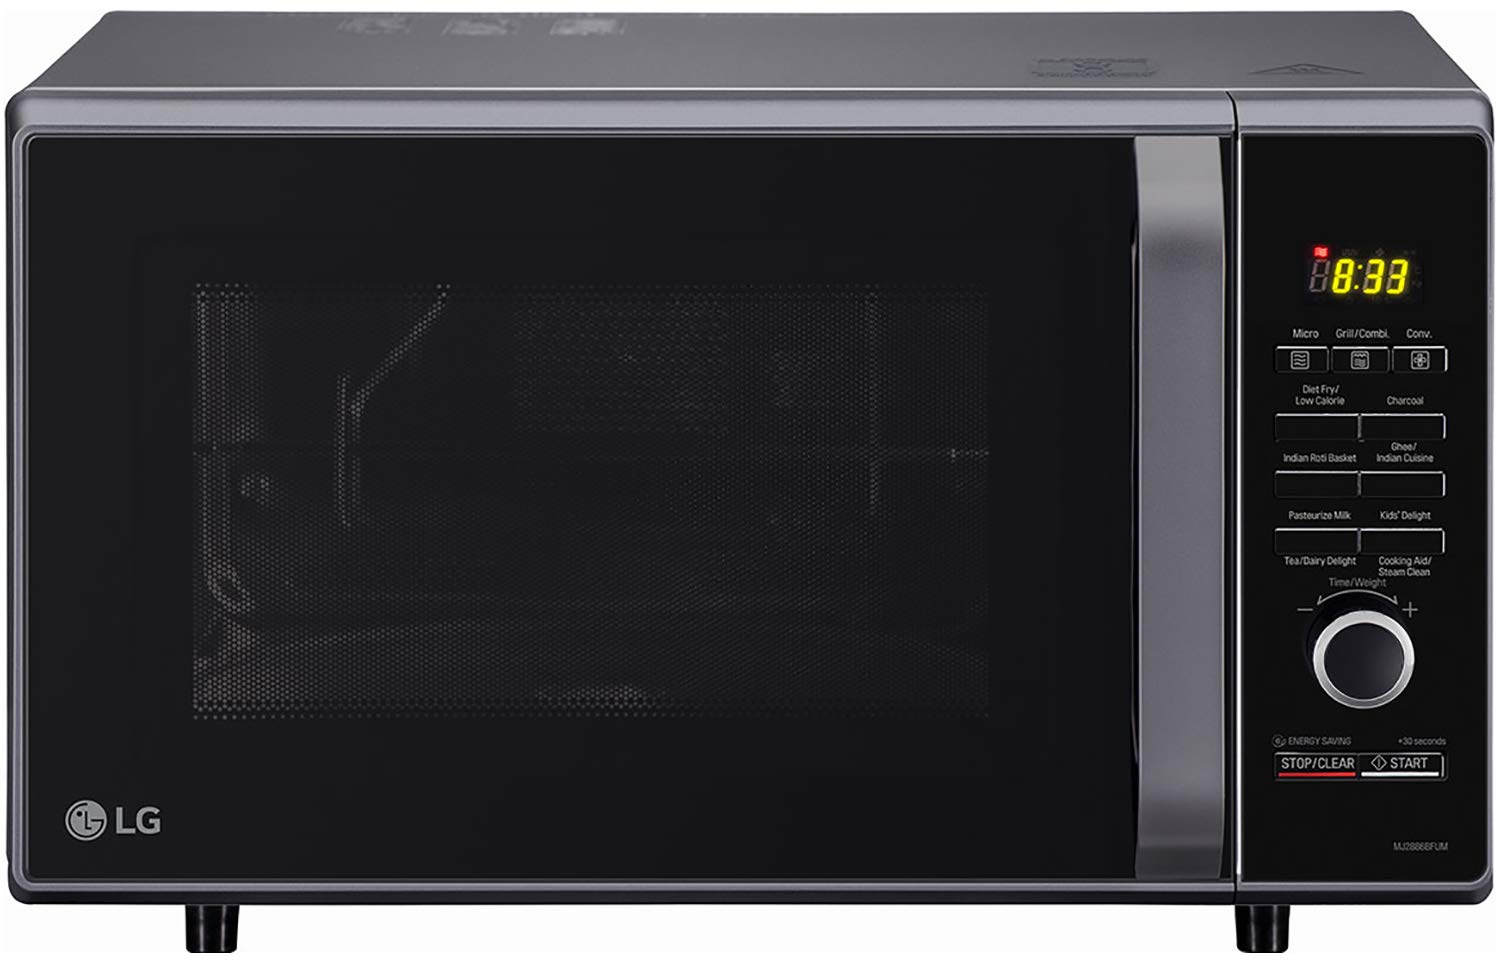 LG 28L Microwave Oven